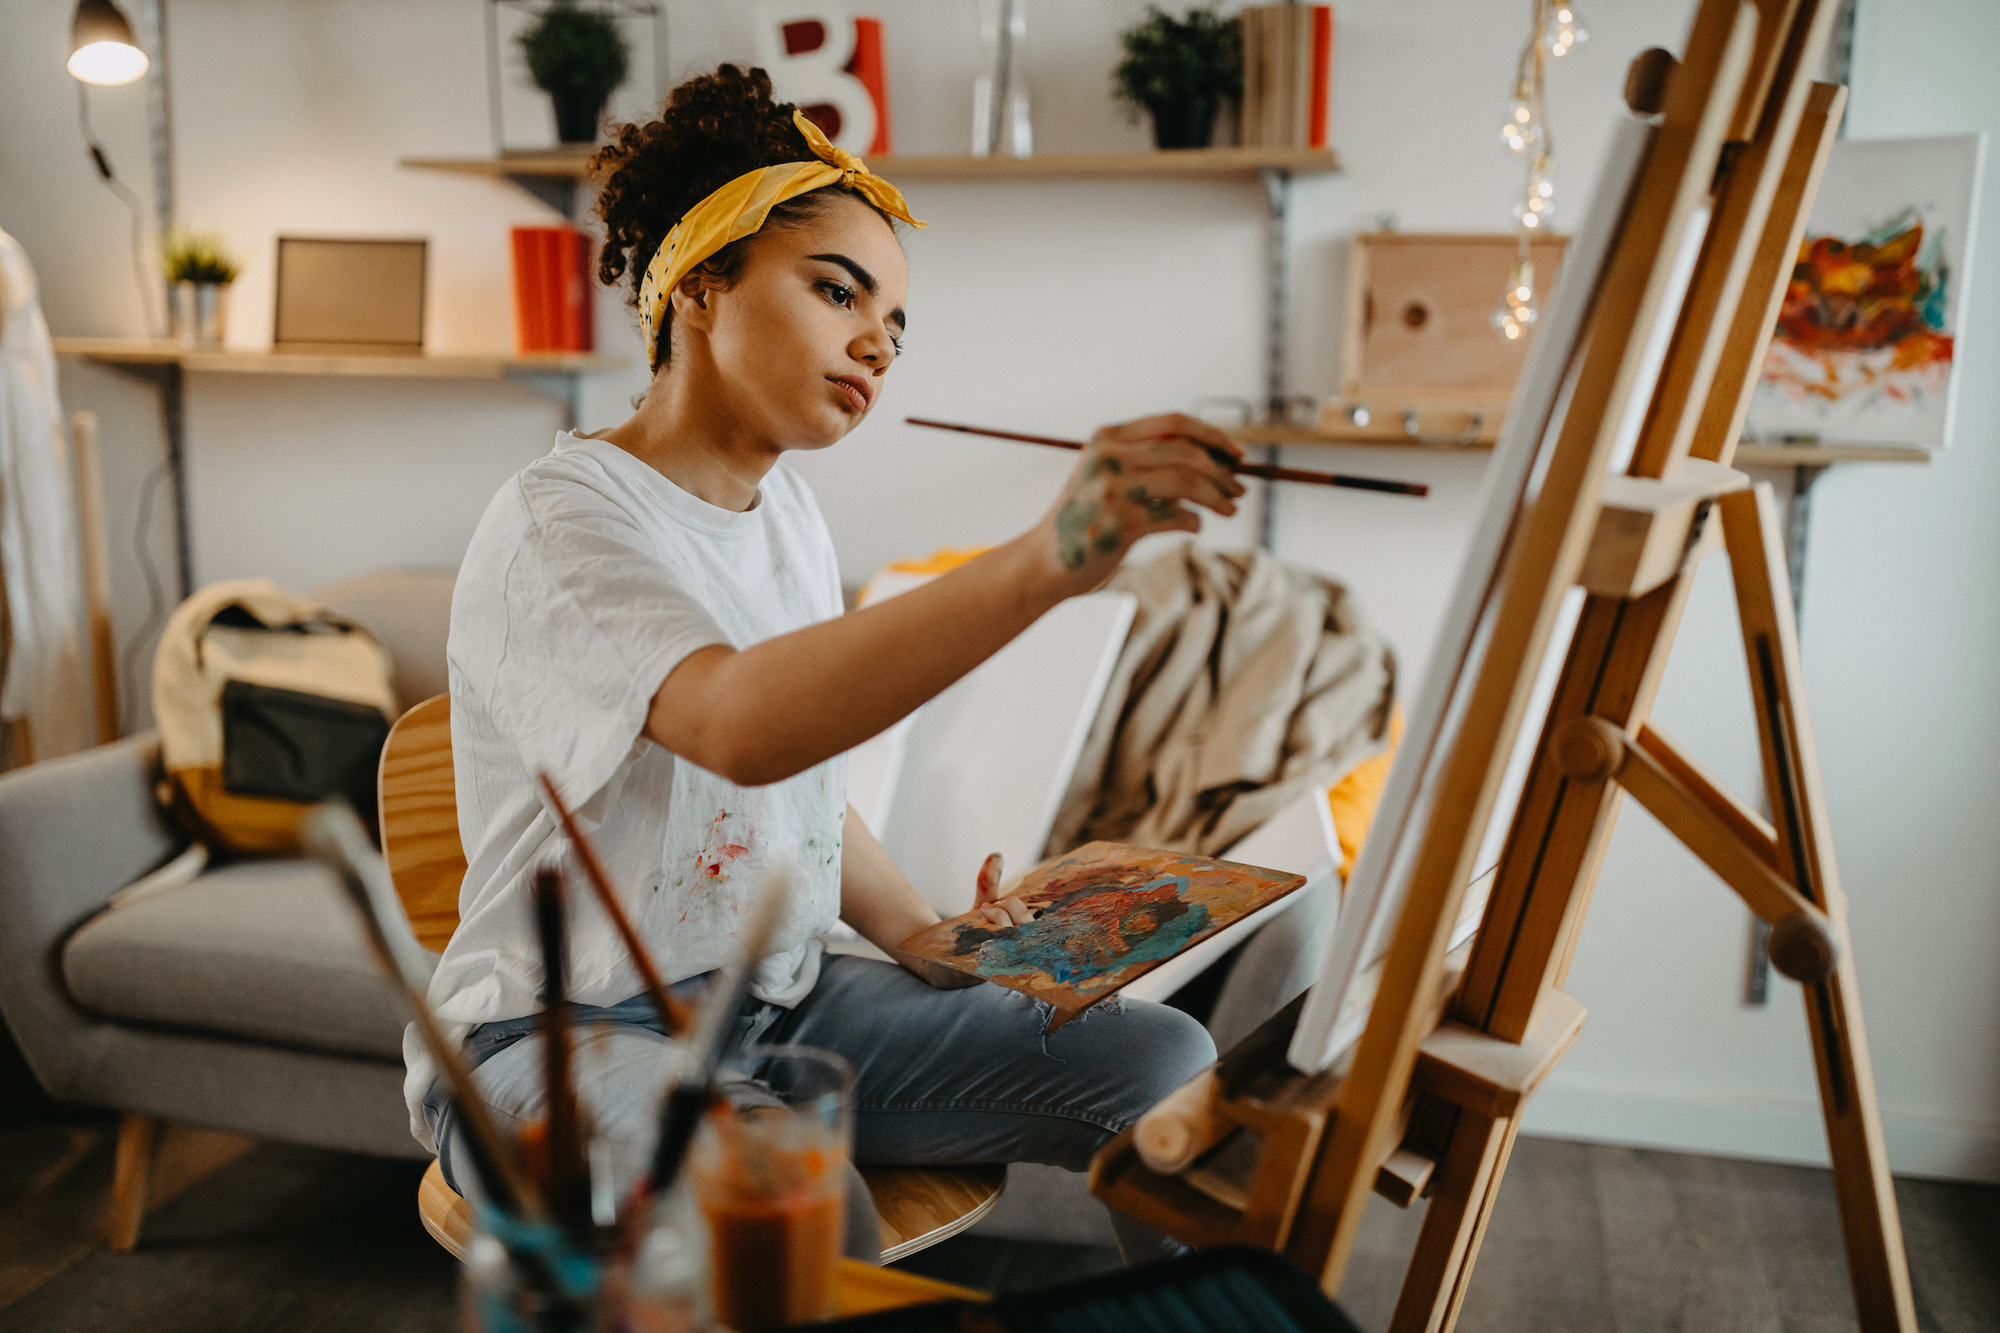 The health benefits of creative expression | UPMC MyHealth Matters